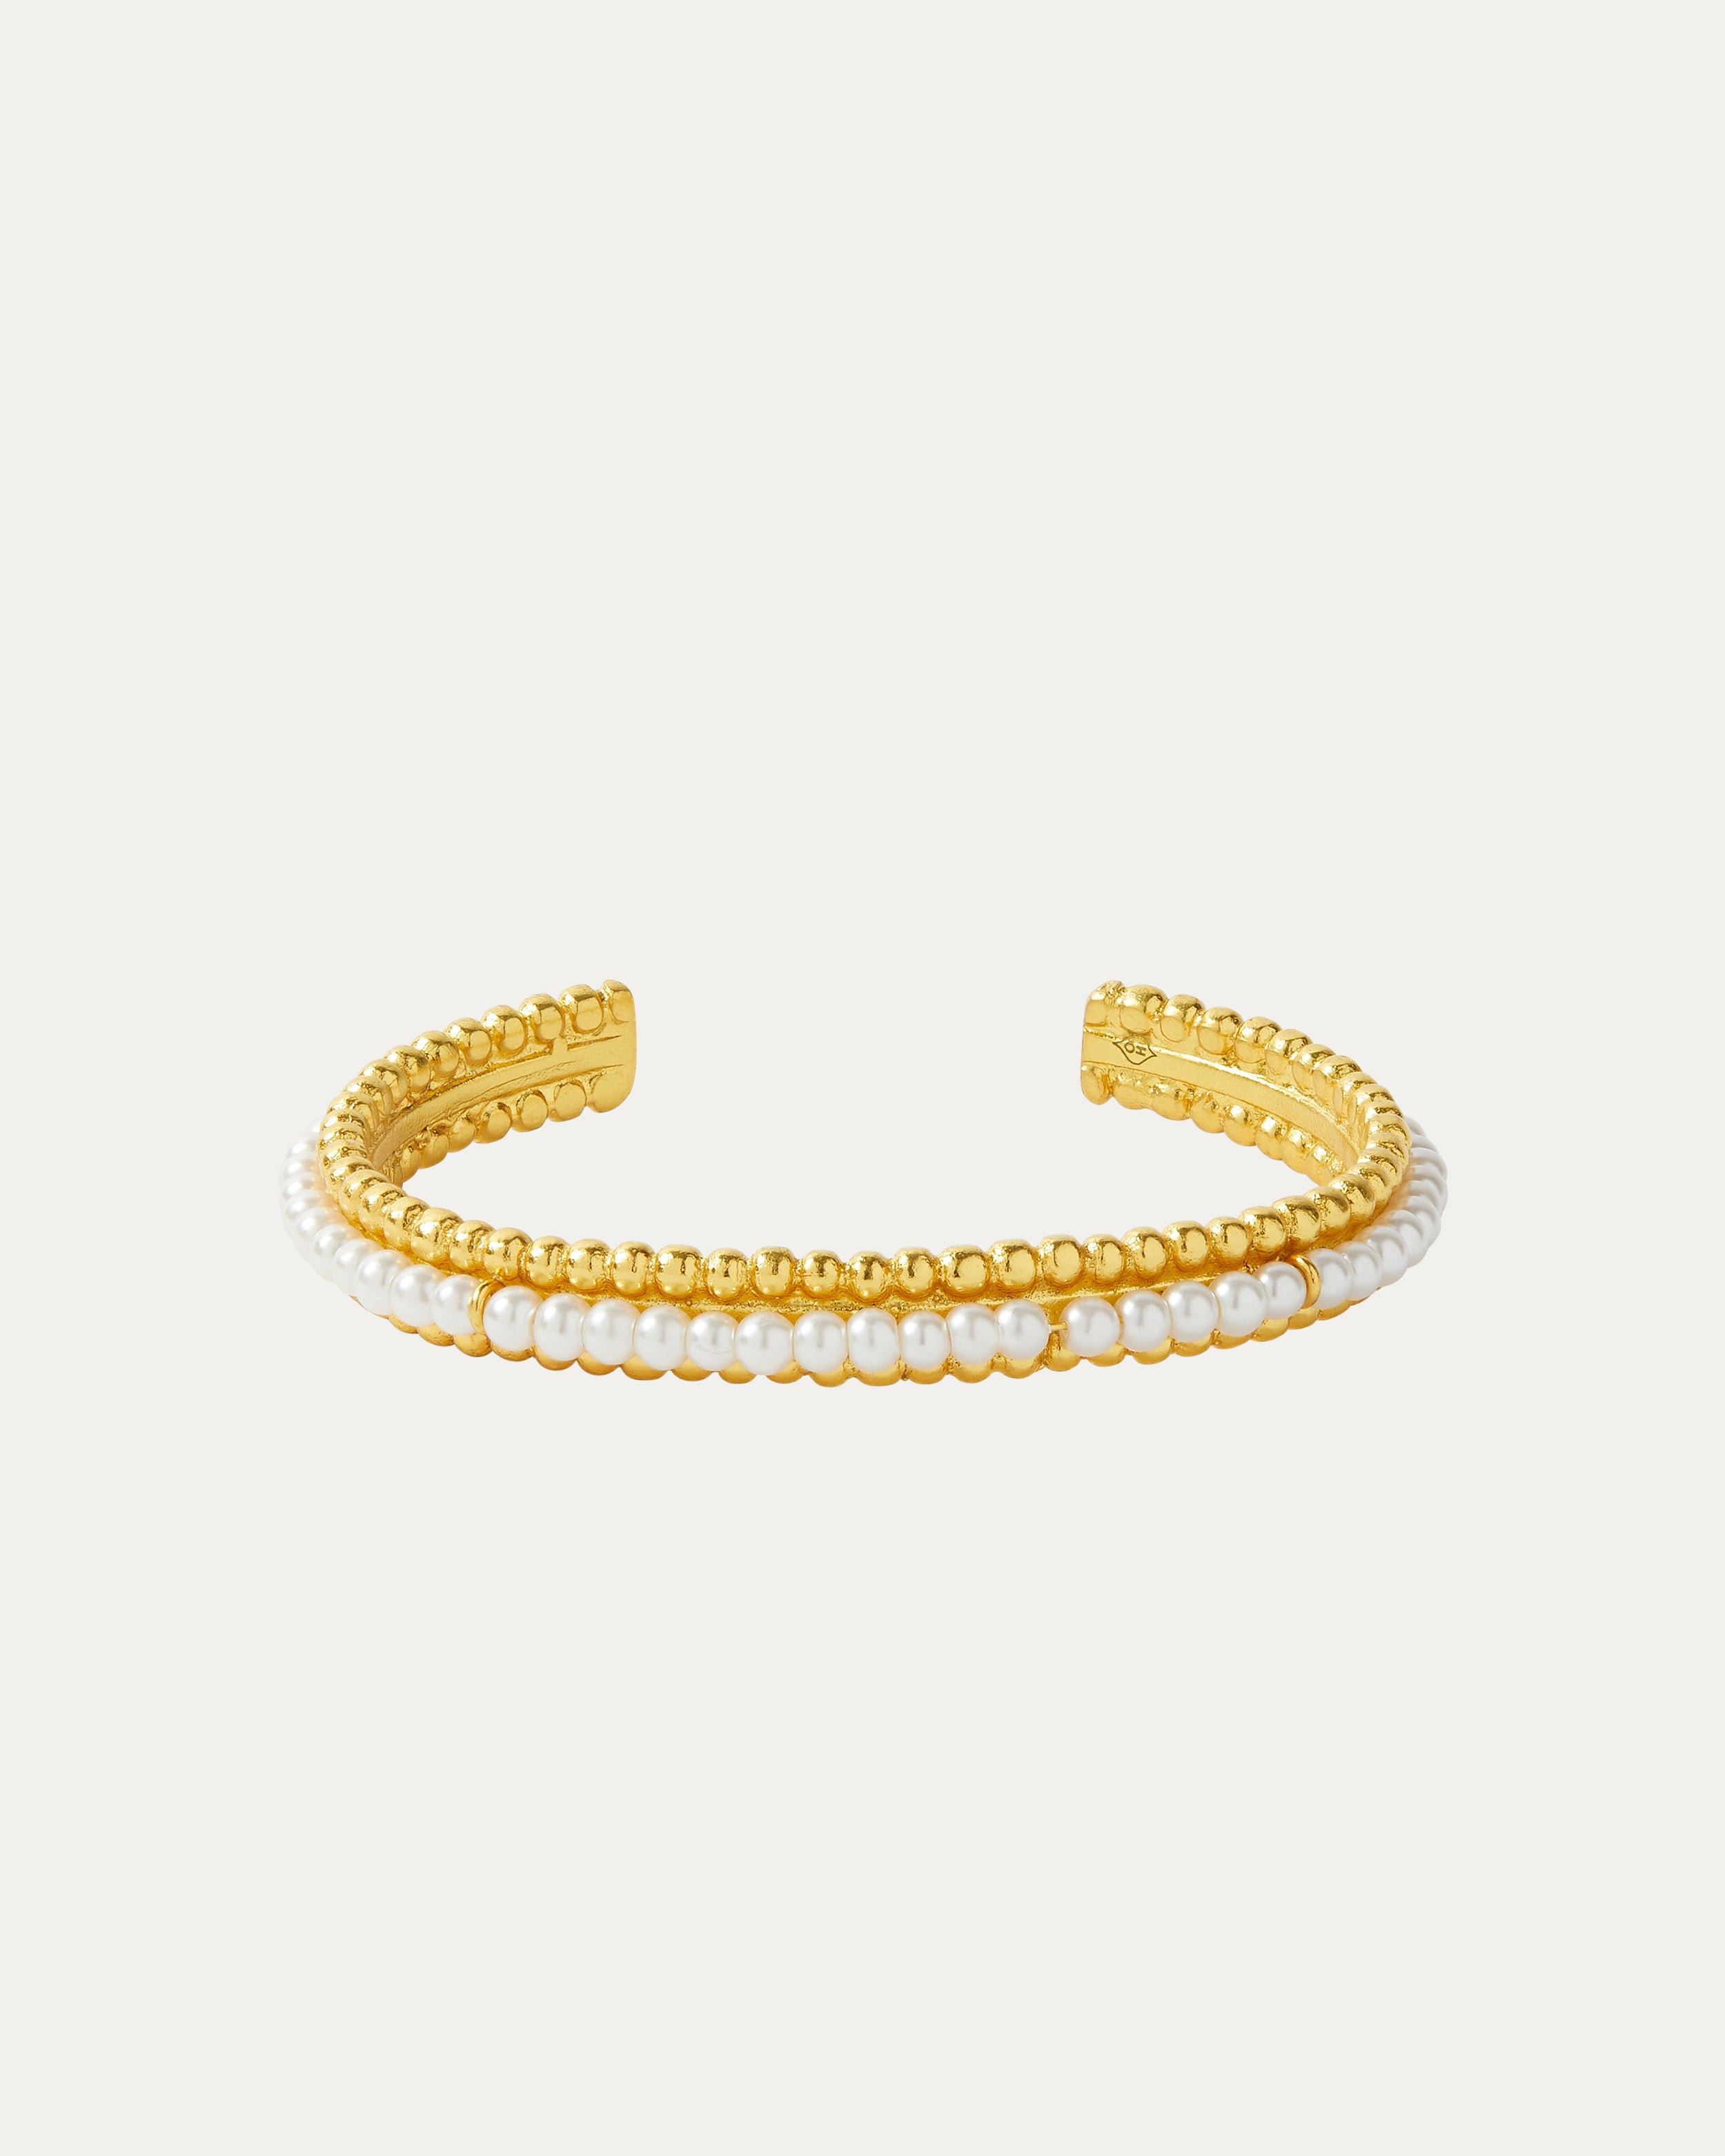 Shop Gold Plated Beaded Cuff-Bracelet by ITRANA at House of Designers –  HOUSE OF DESIGNERS